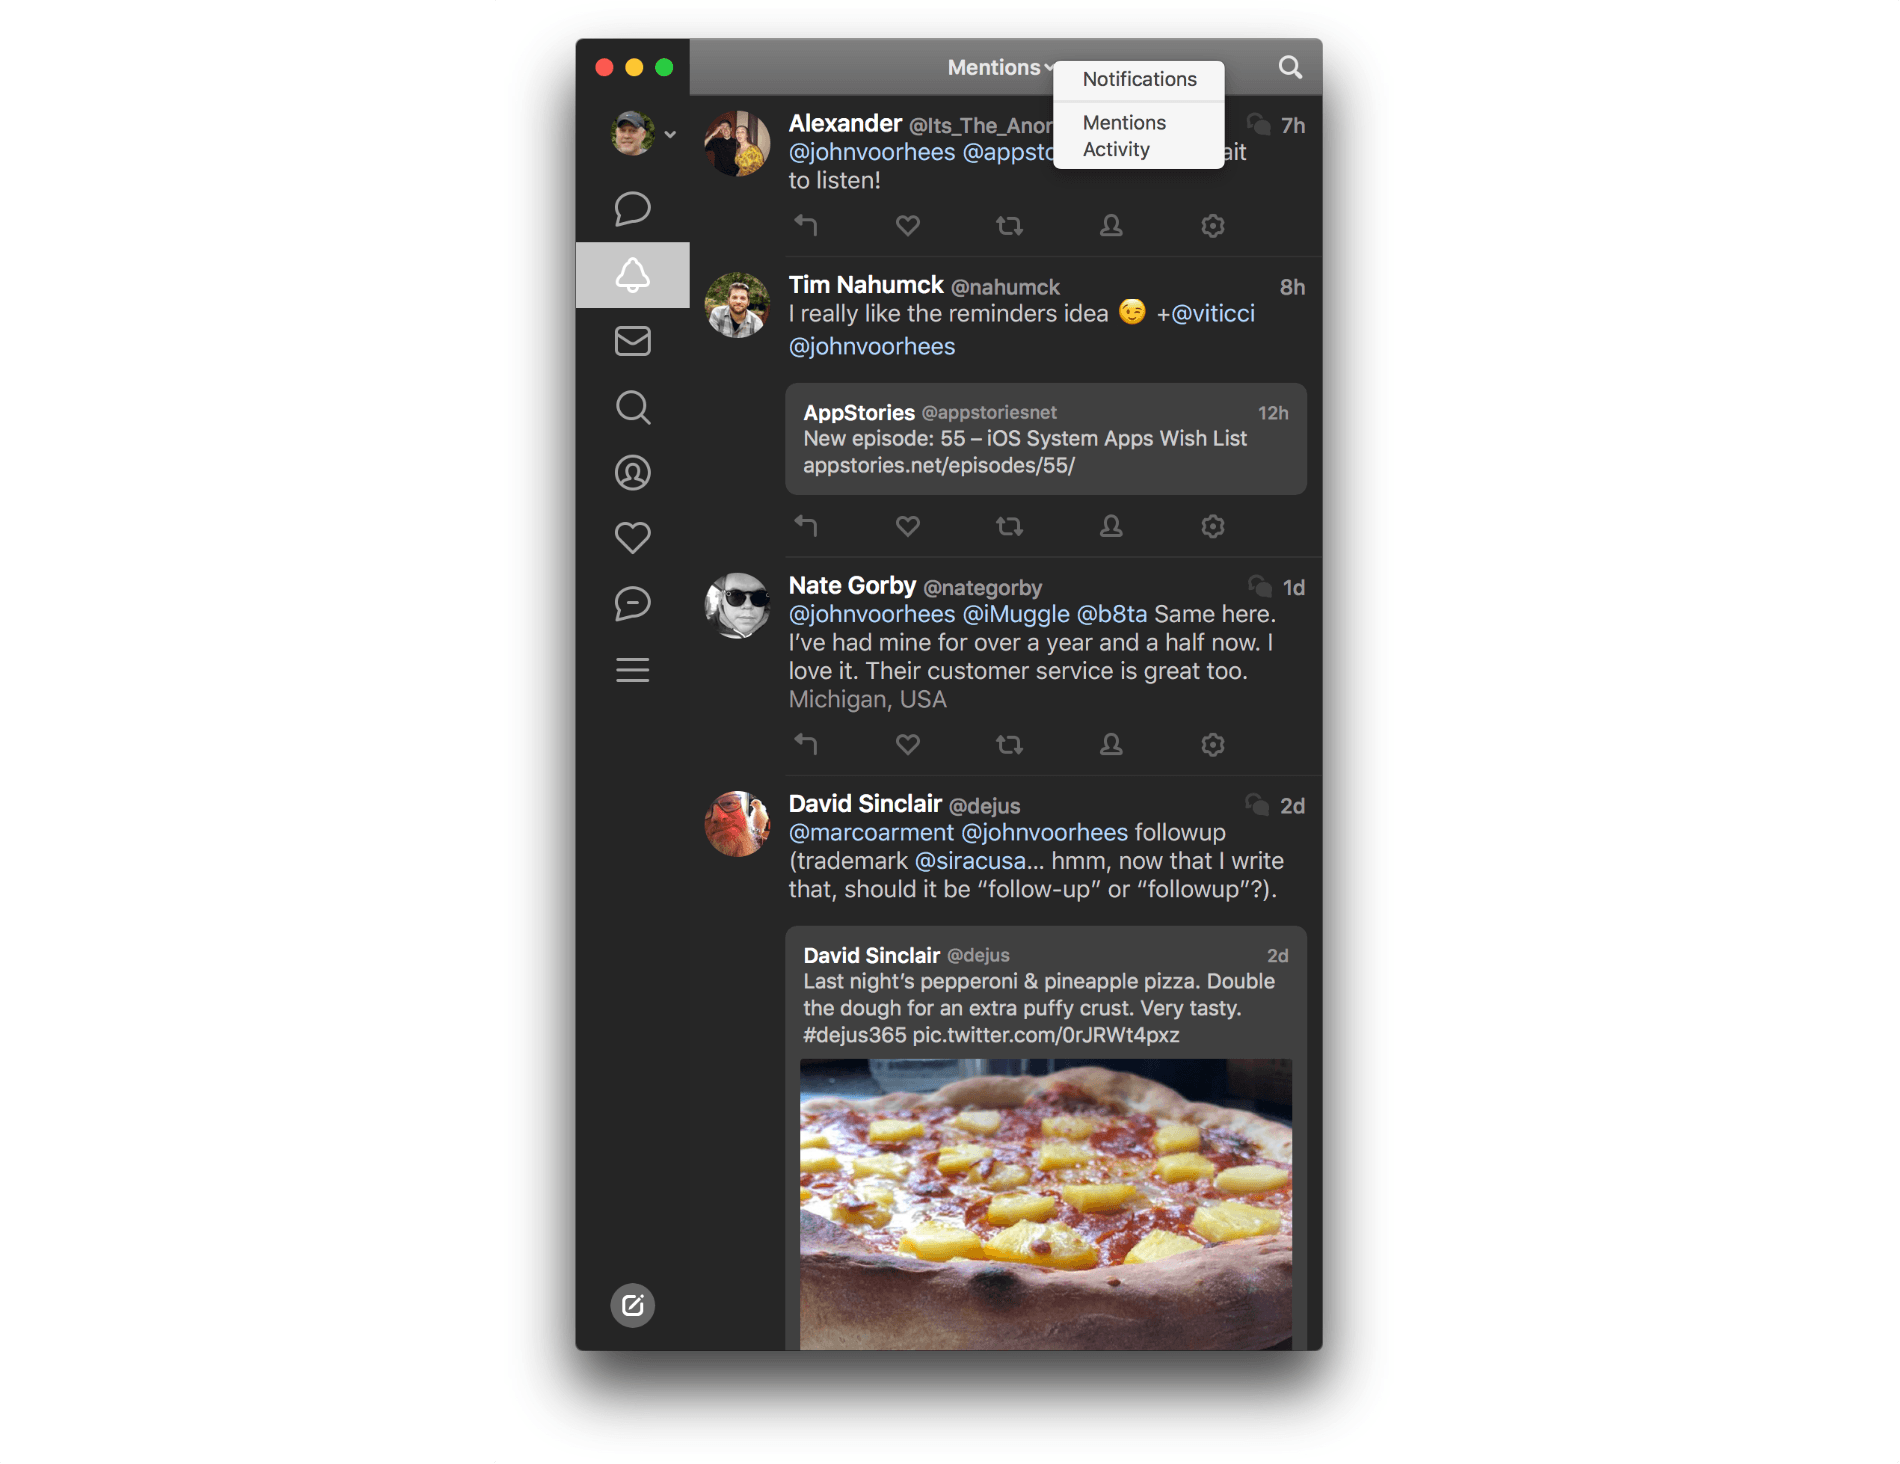 Tweetbot 3 adds title bar navigation within sidebar sections.